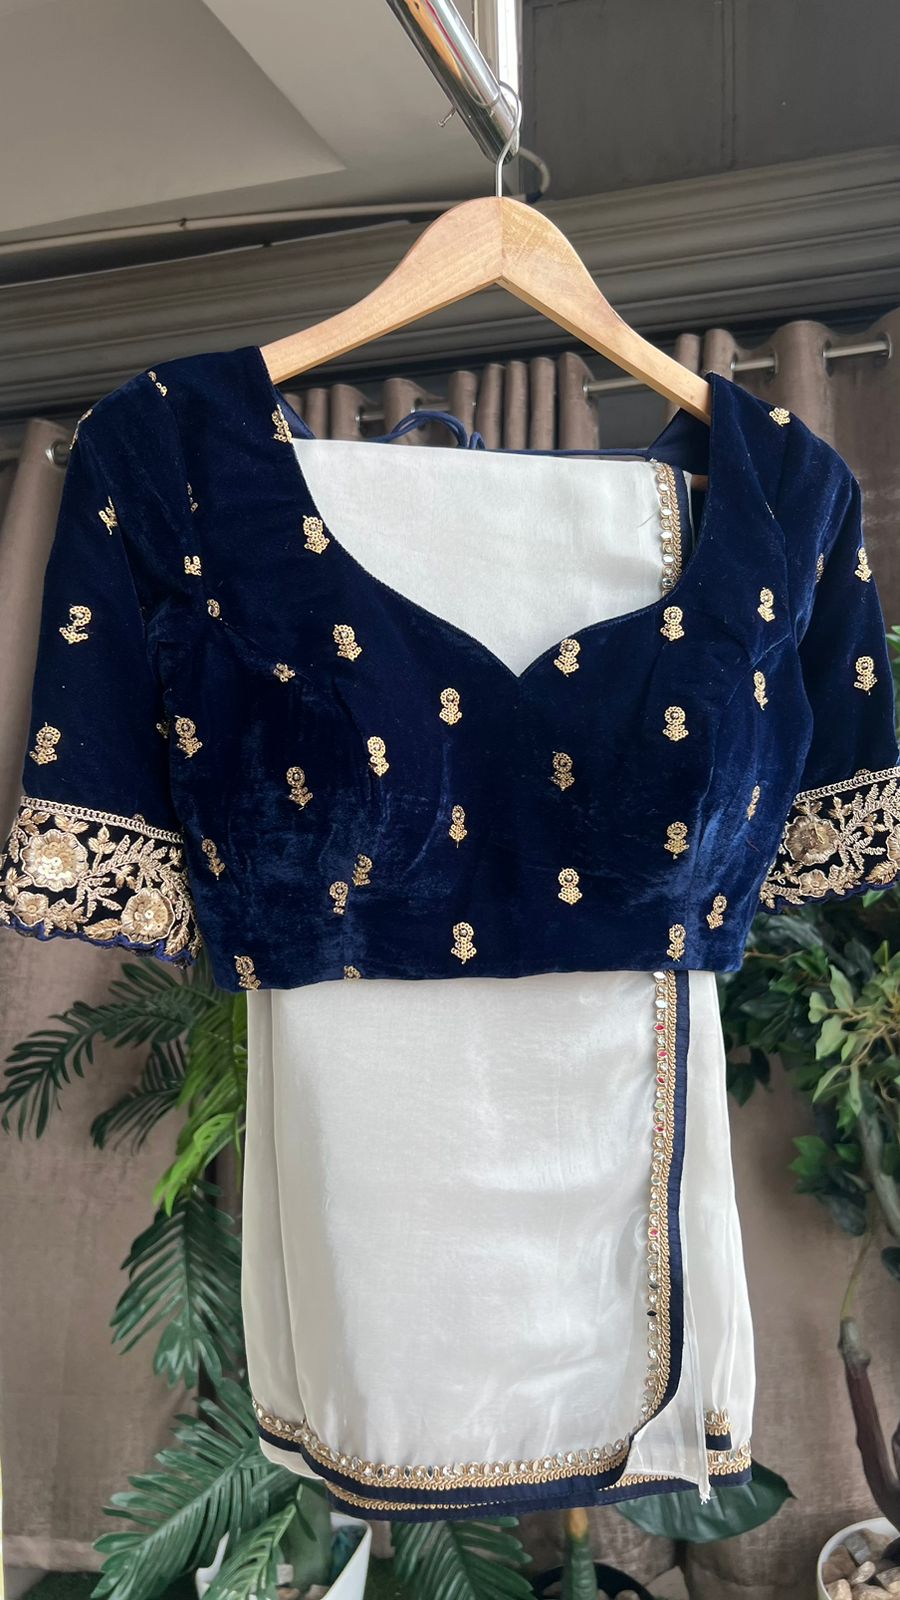 Silver tissue saree with velvet embroidery blouse